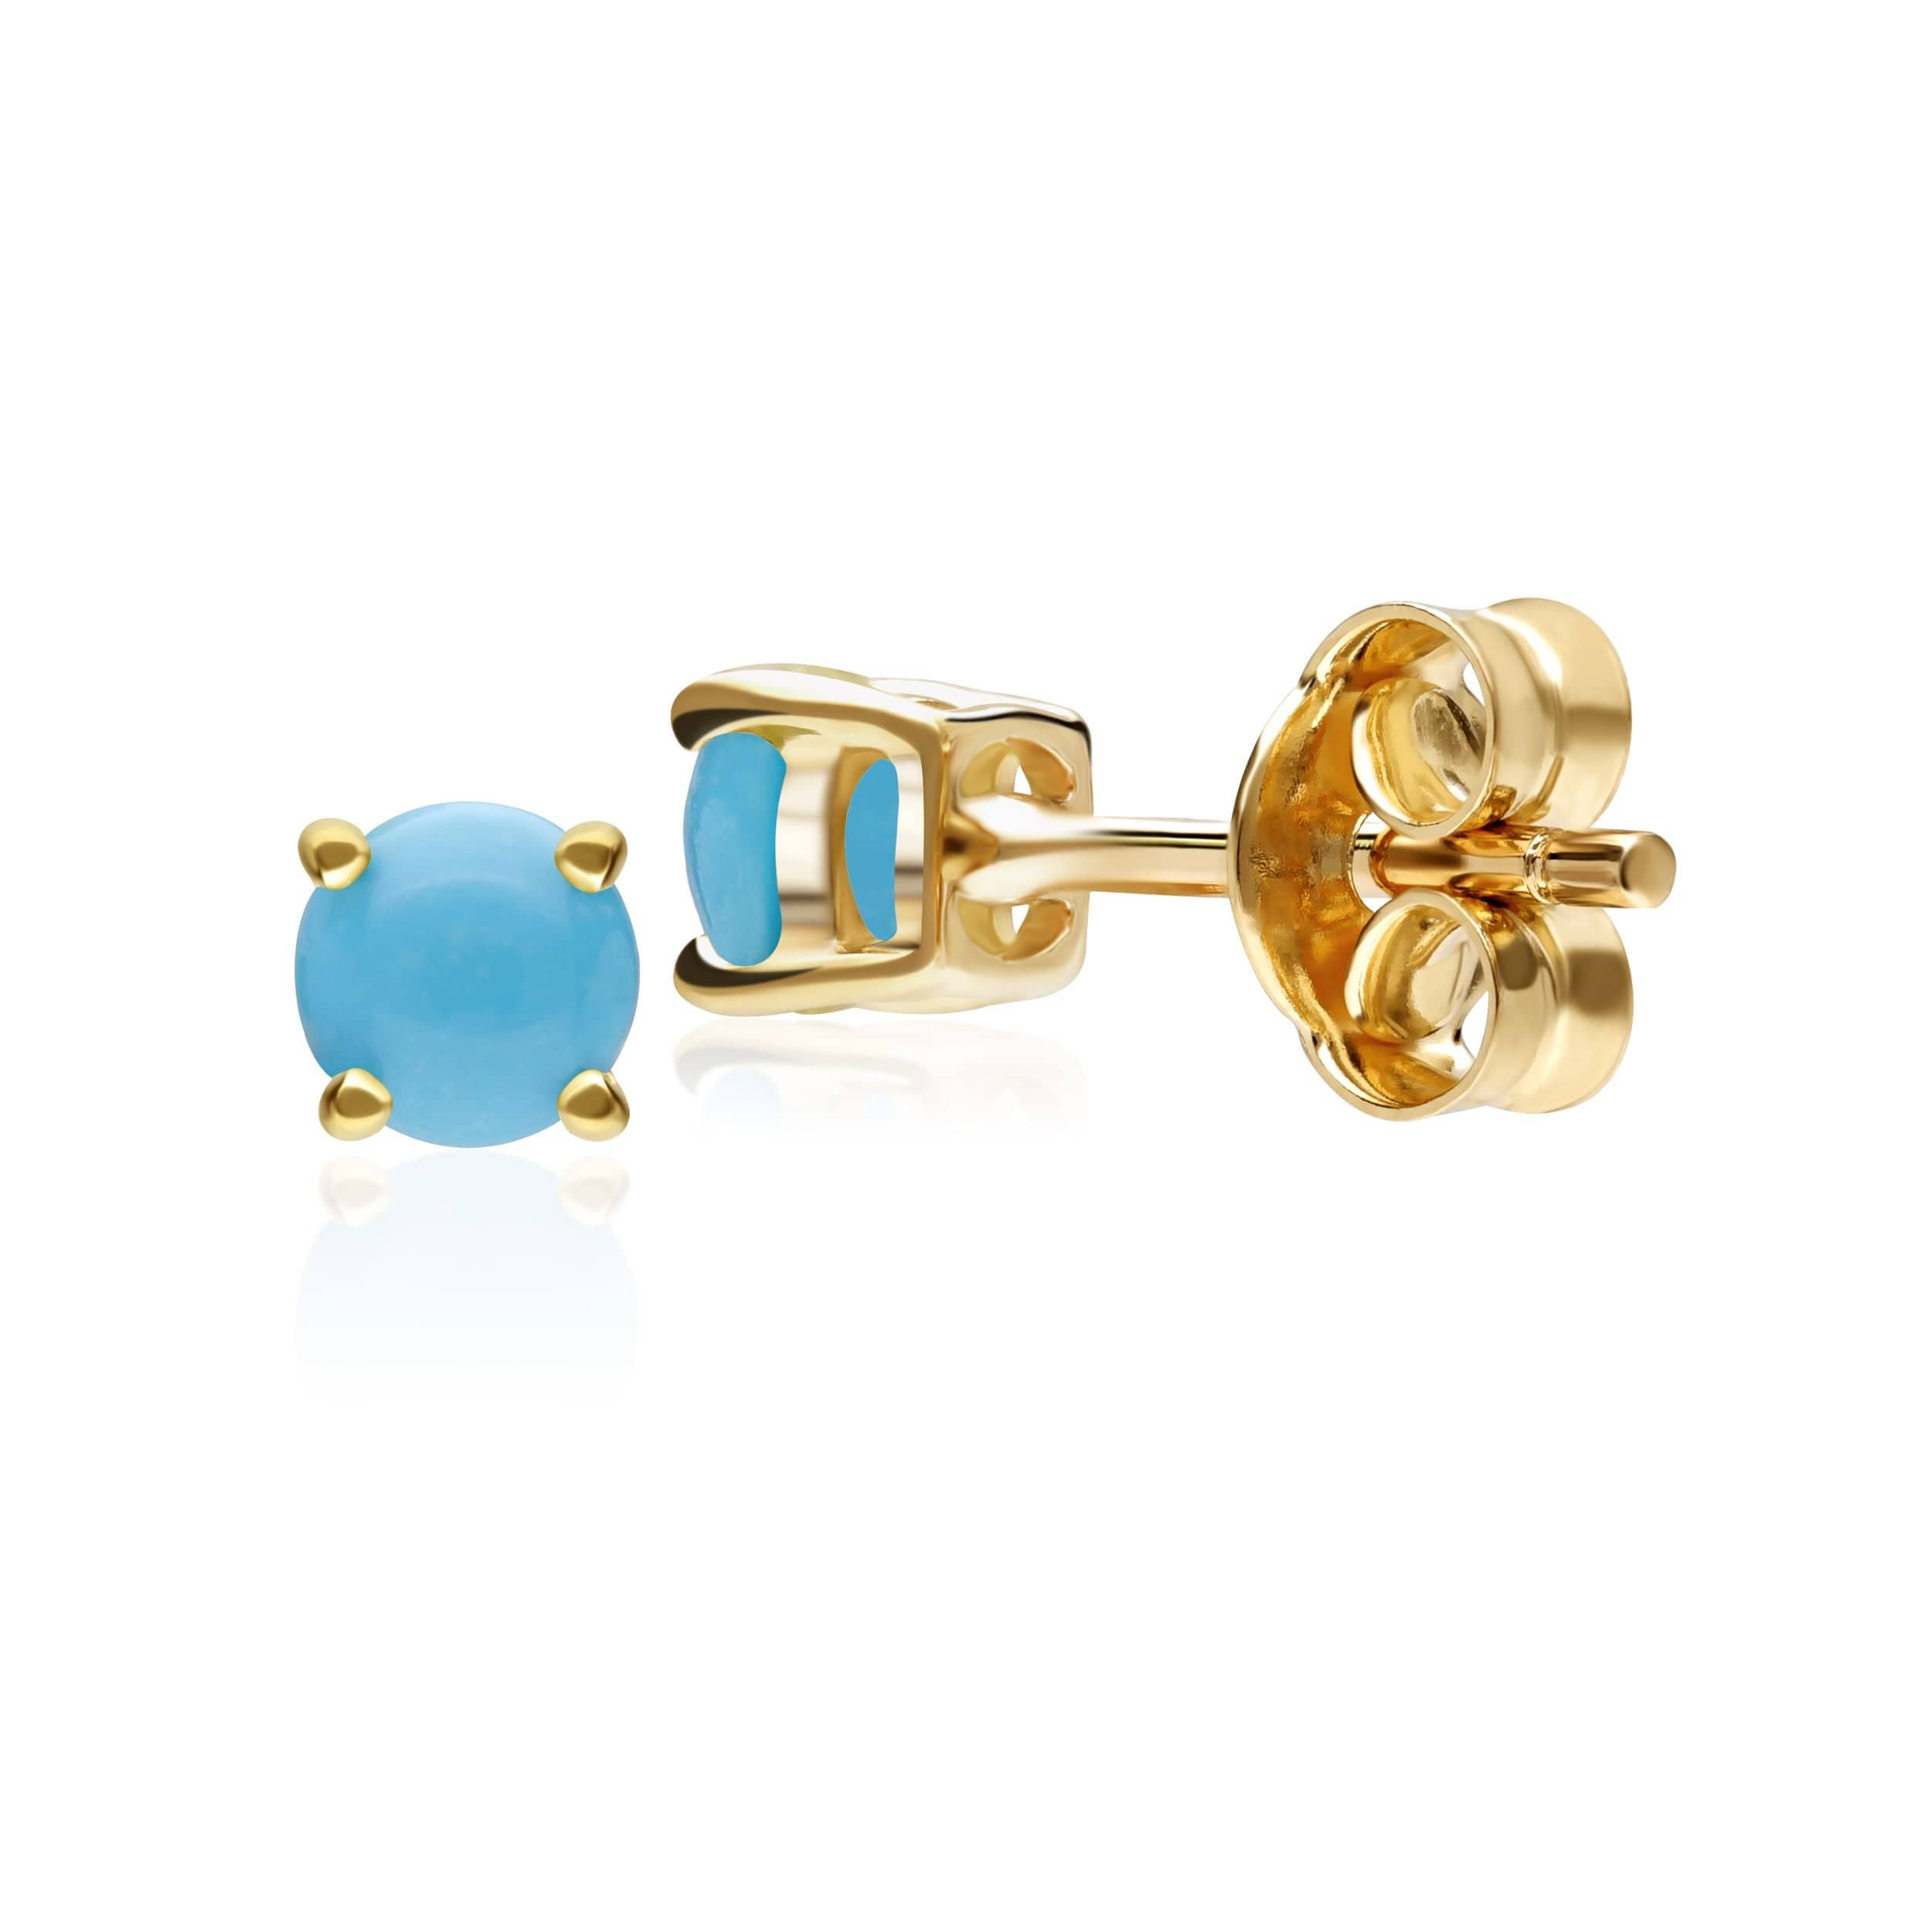 Classic Round Turquoise Cabochon Stud Earrings in 9ct Yellow Gold - Gemondo